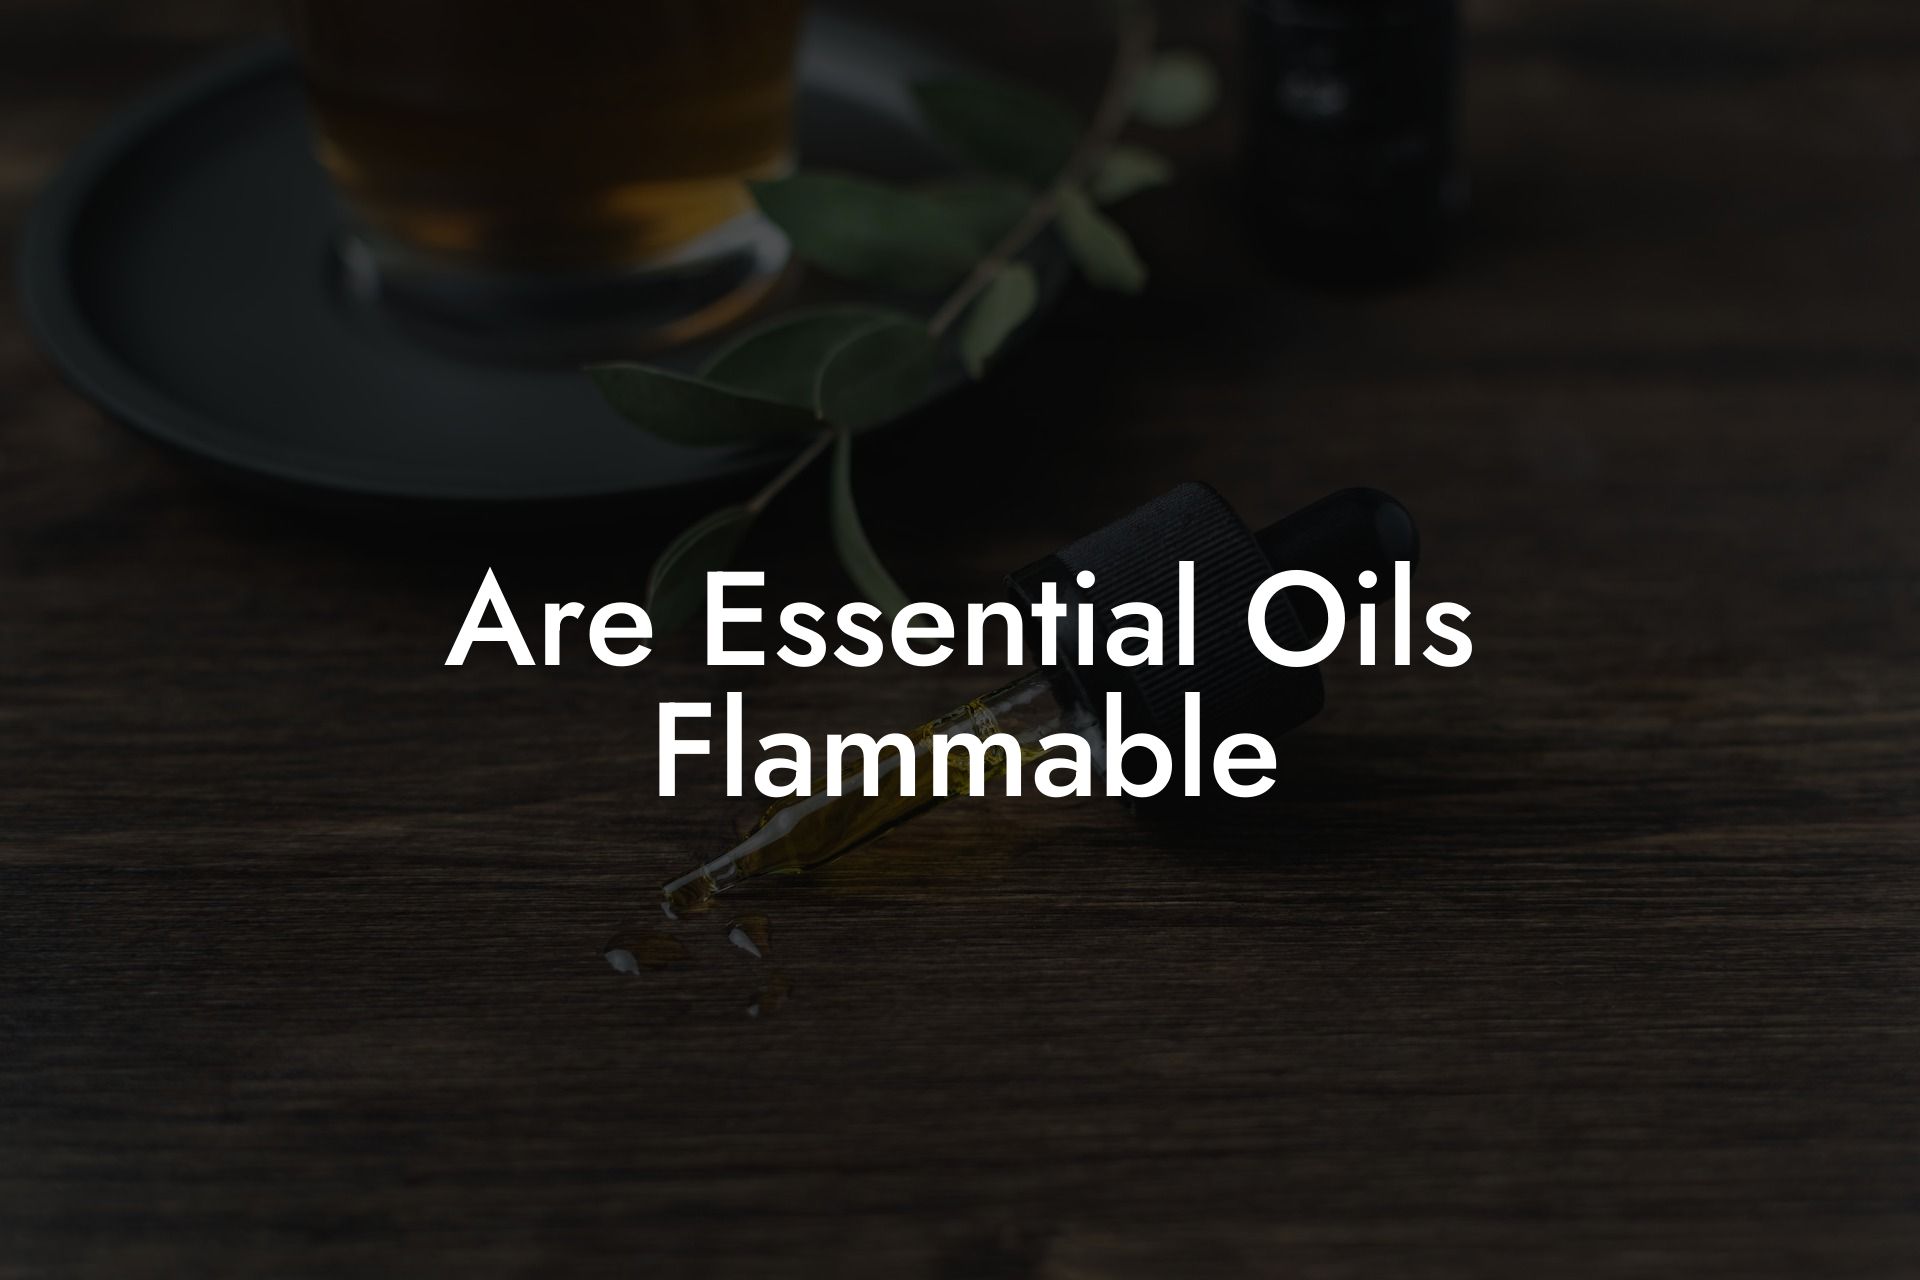 Are Essential Oils Flammable